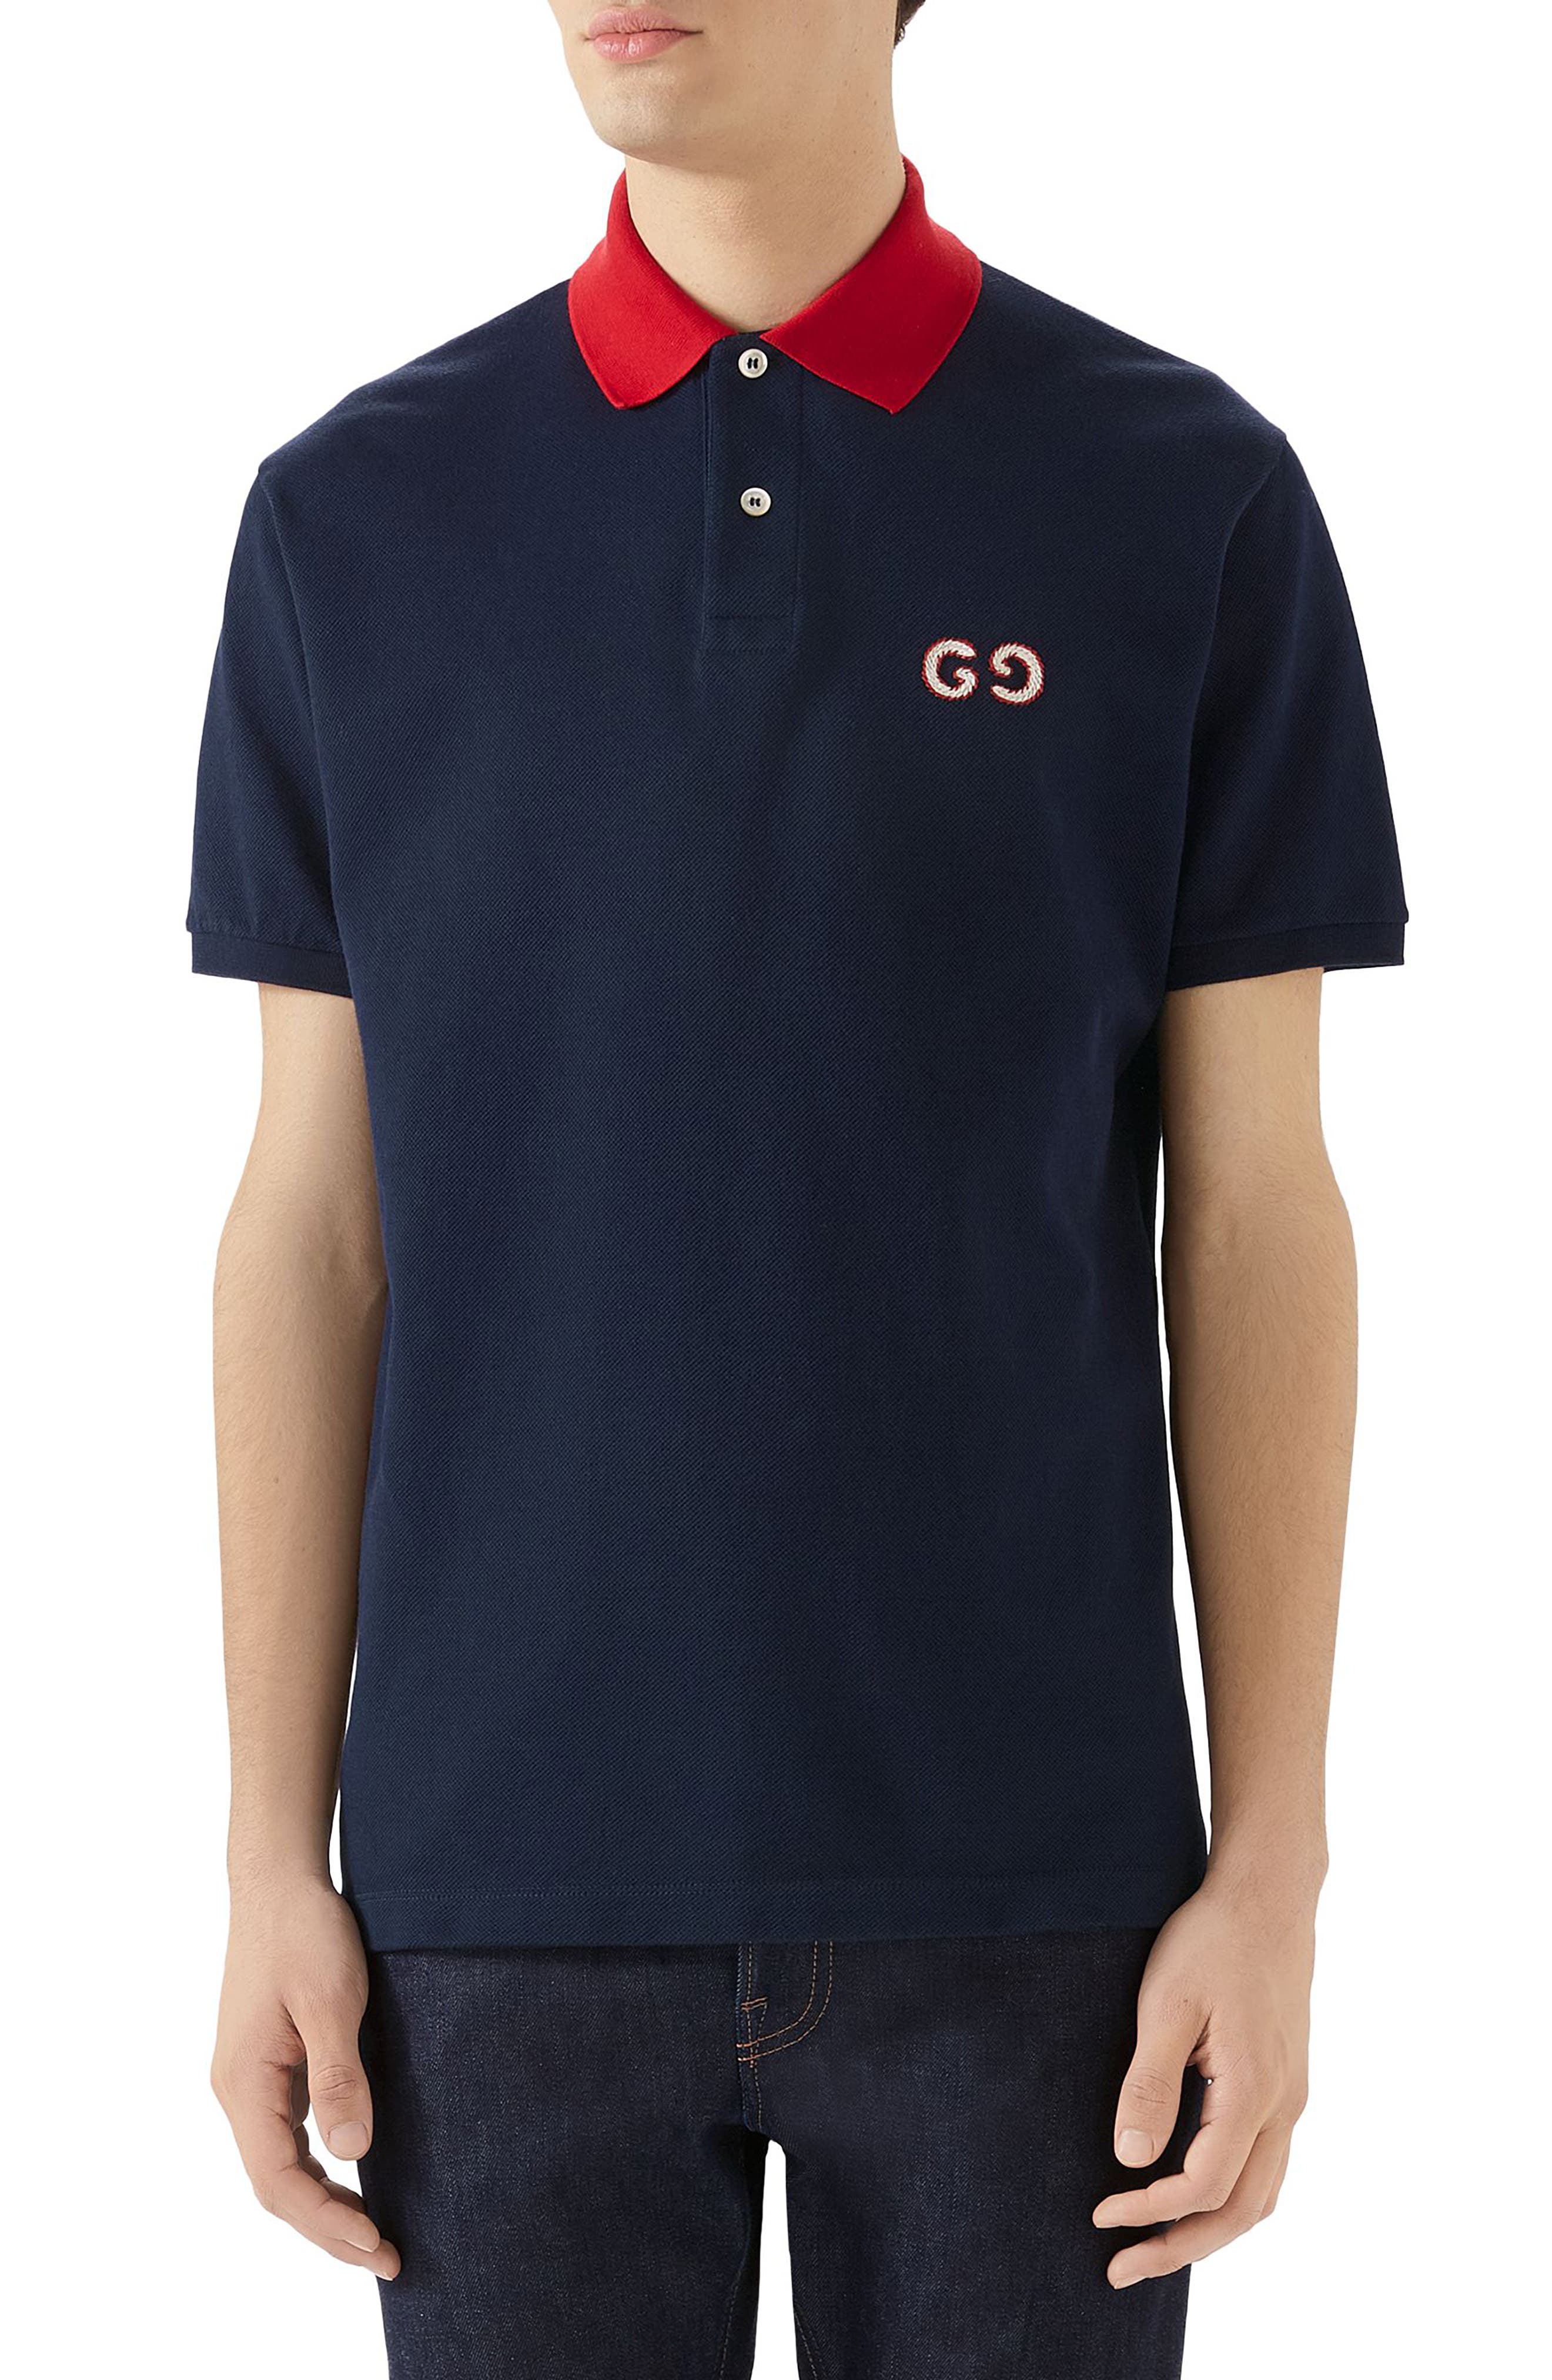 gucci men's clothing nordstrom